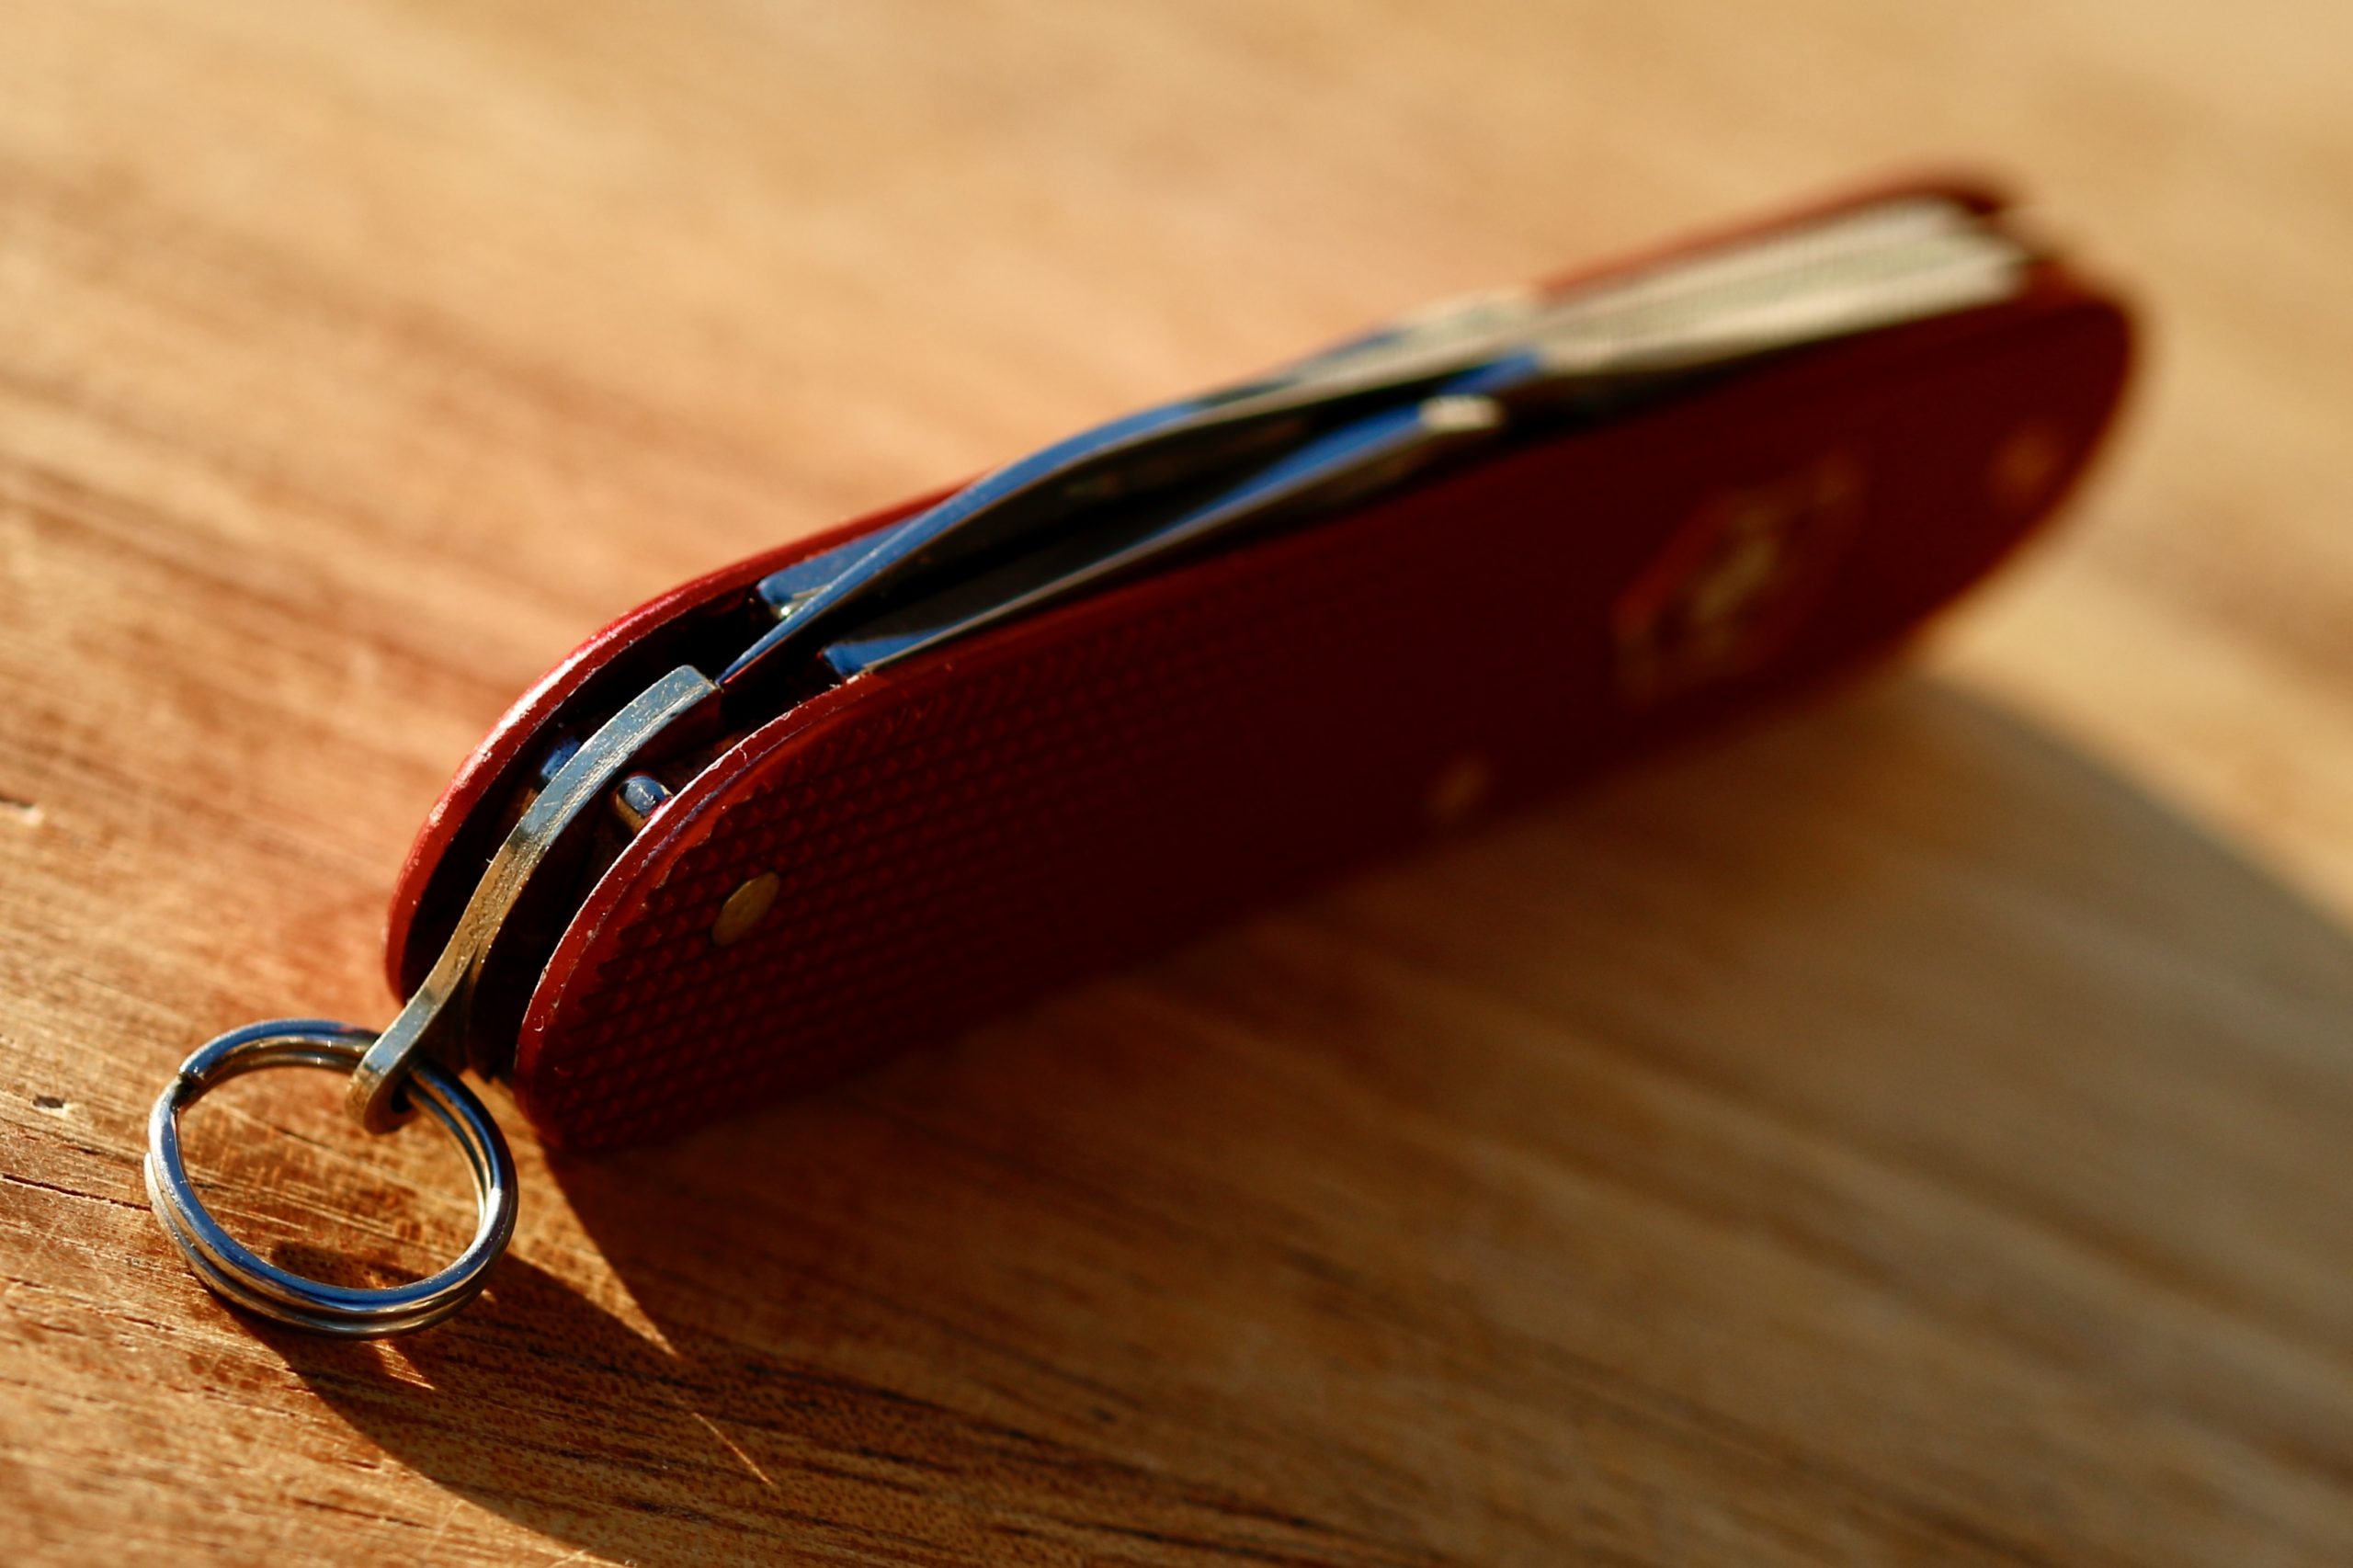 The whole design is light and compact. The Victorinox Alox Cadet weighs 1.3 ounces.